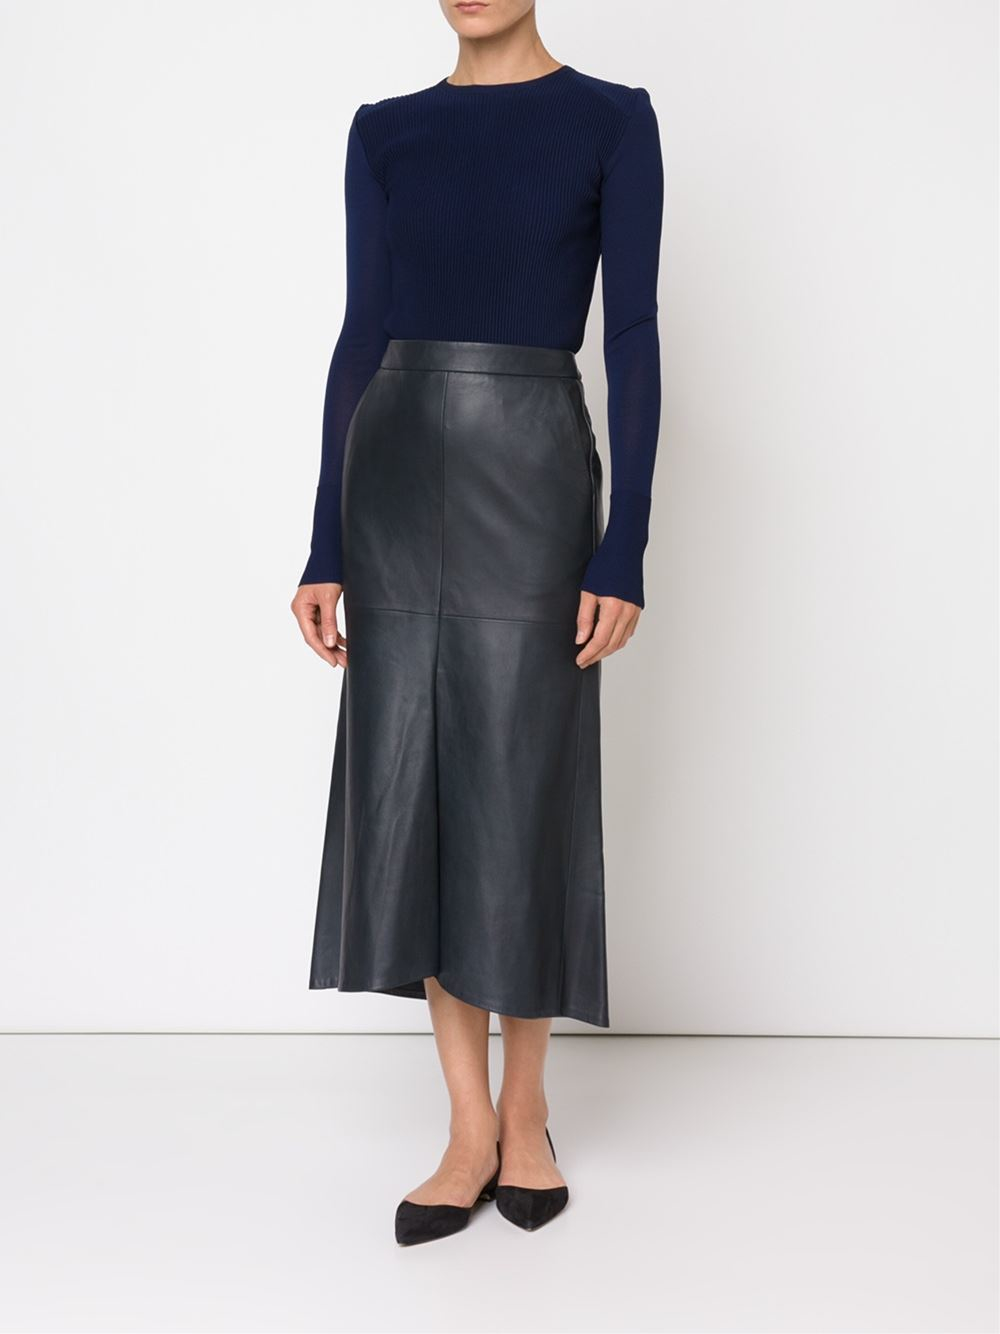 Tibi Leather Inverted Front Pleat Skirt in Black - Lyst